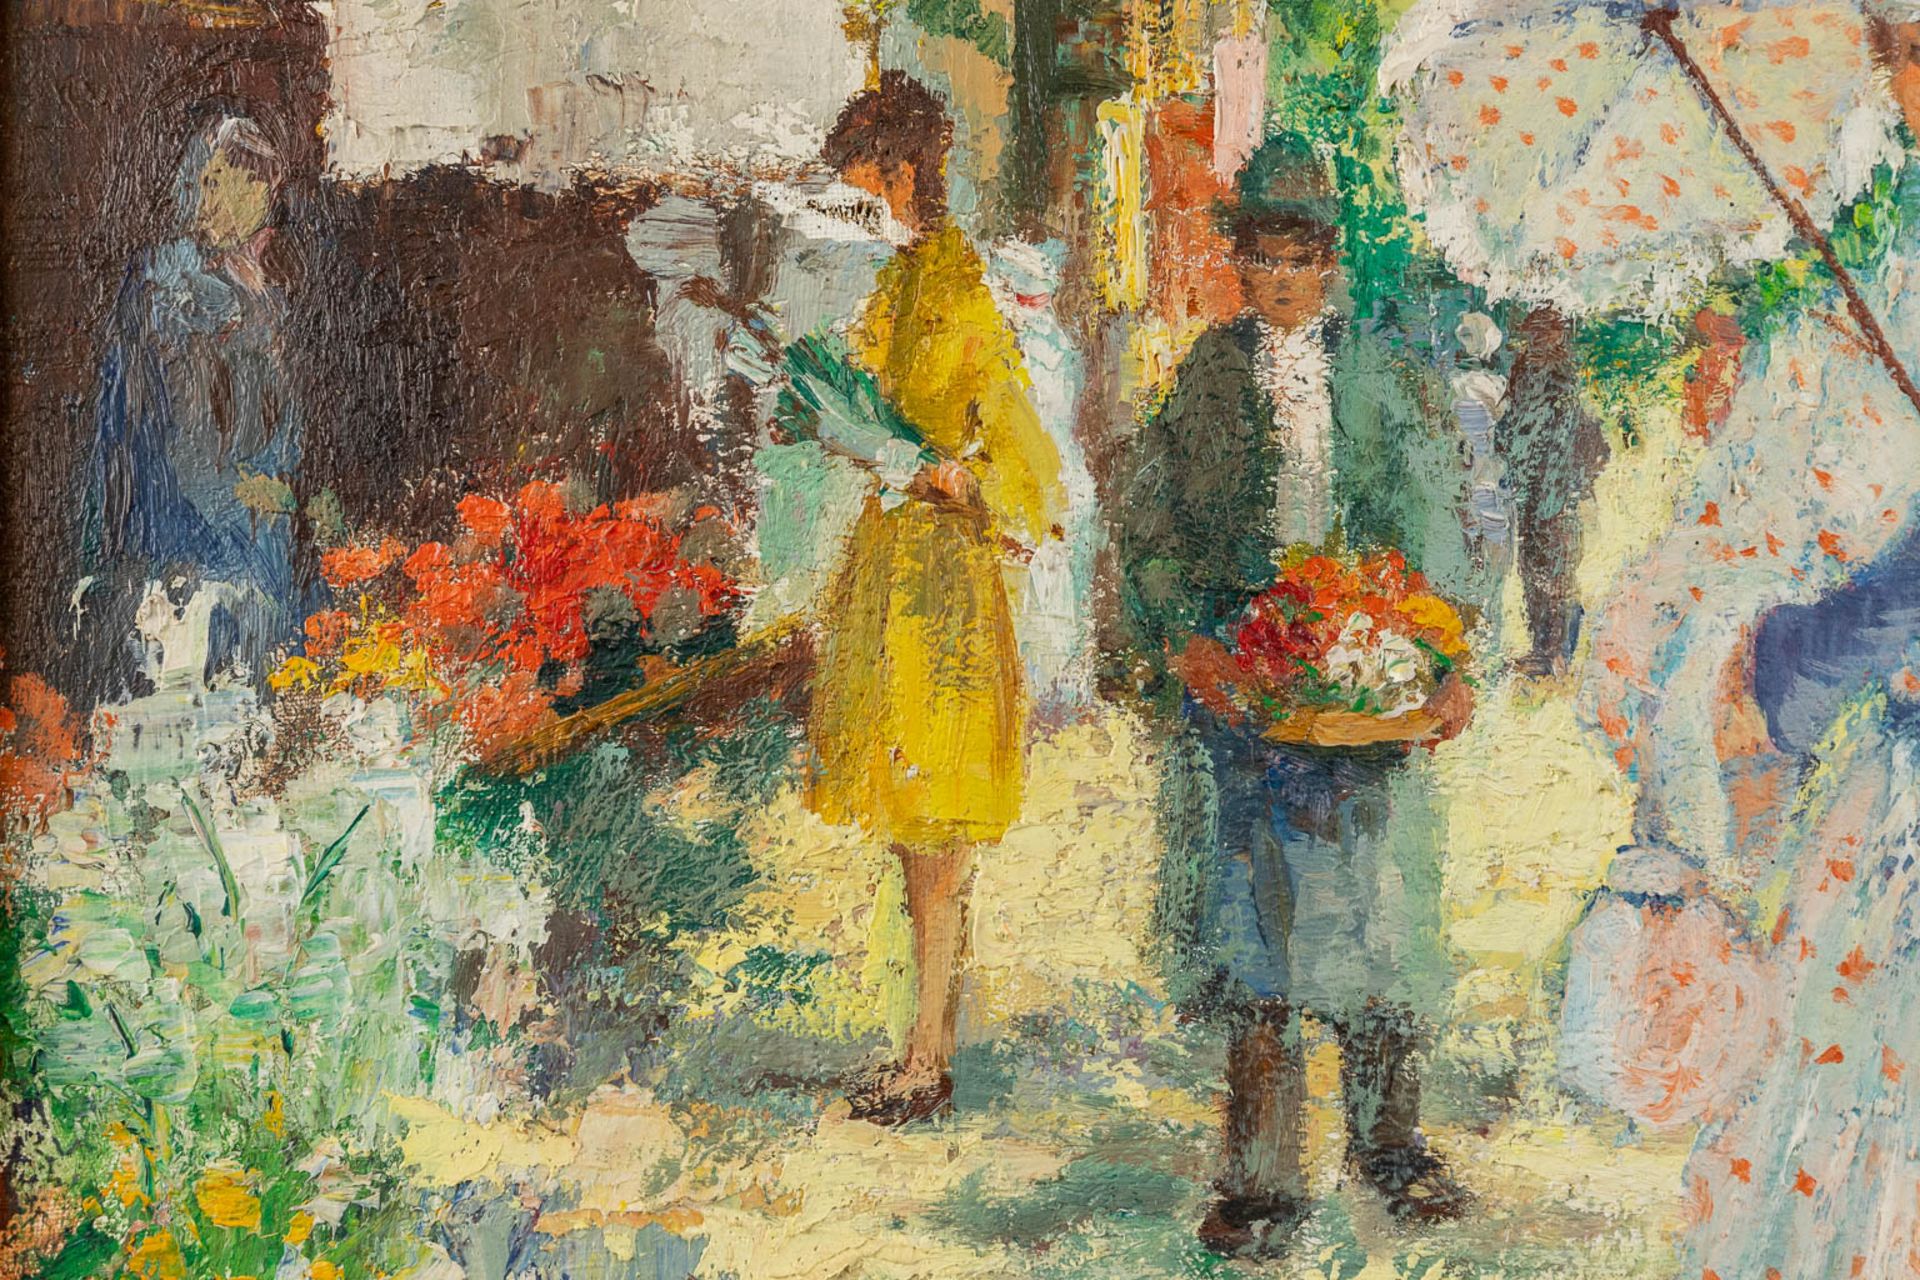 Marguerite AERS (1918-1995) 'The Flower Market' oil on canvas. (W:45 x H:55 cm) - Image 4 of 8